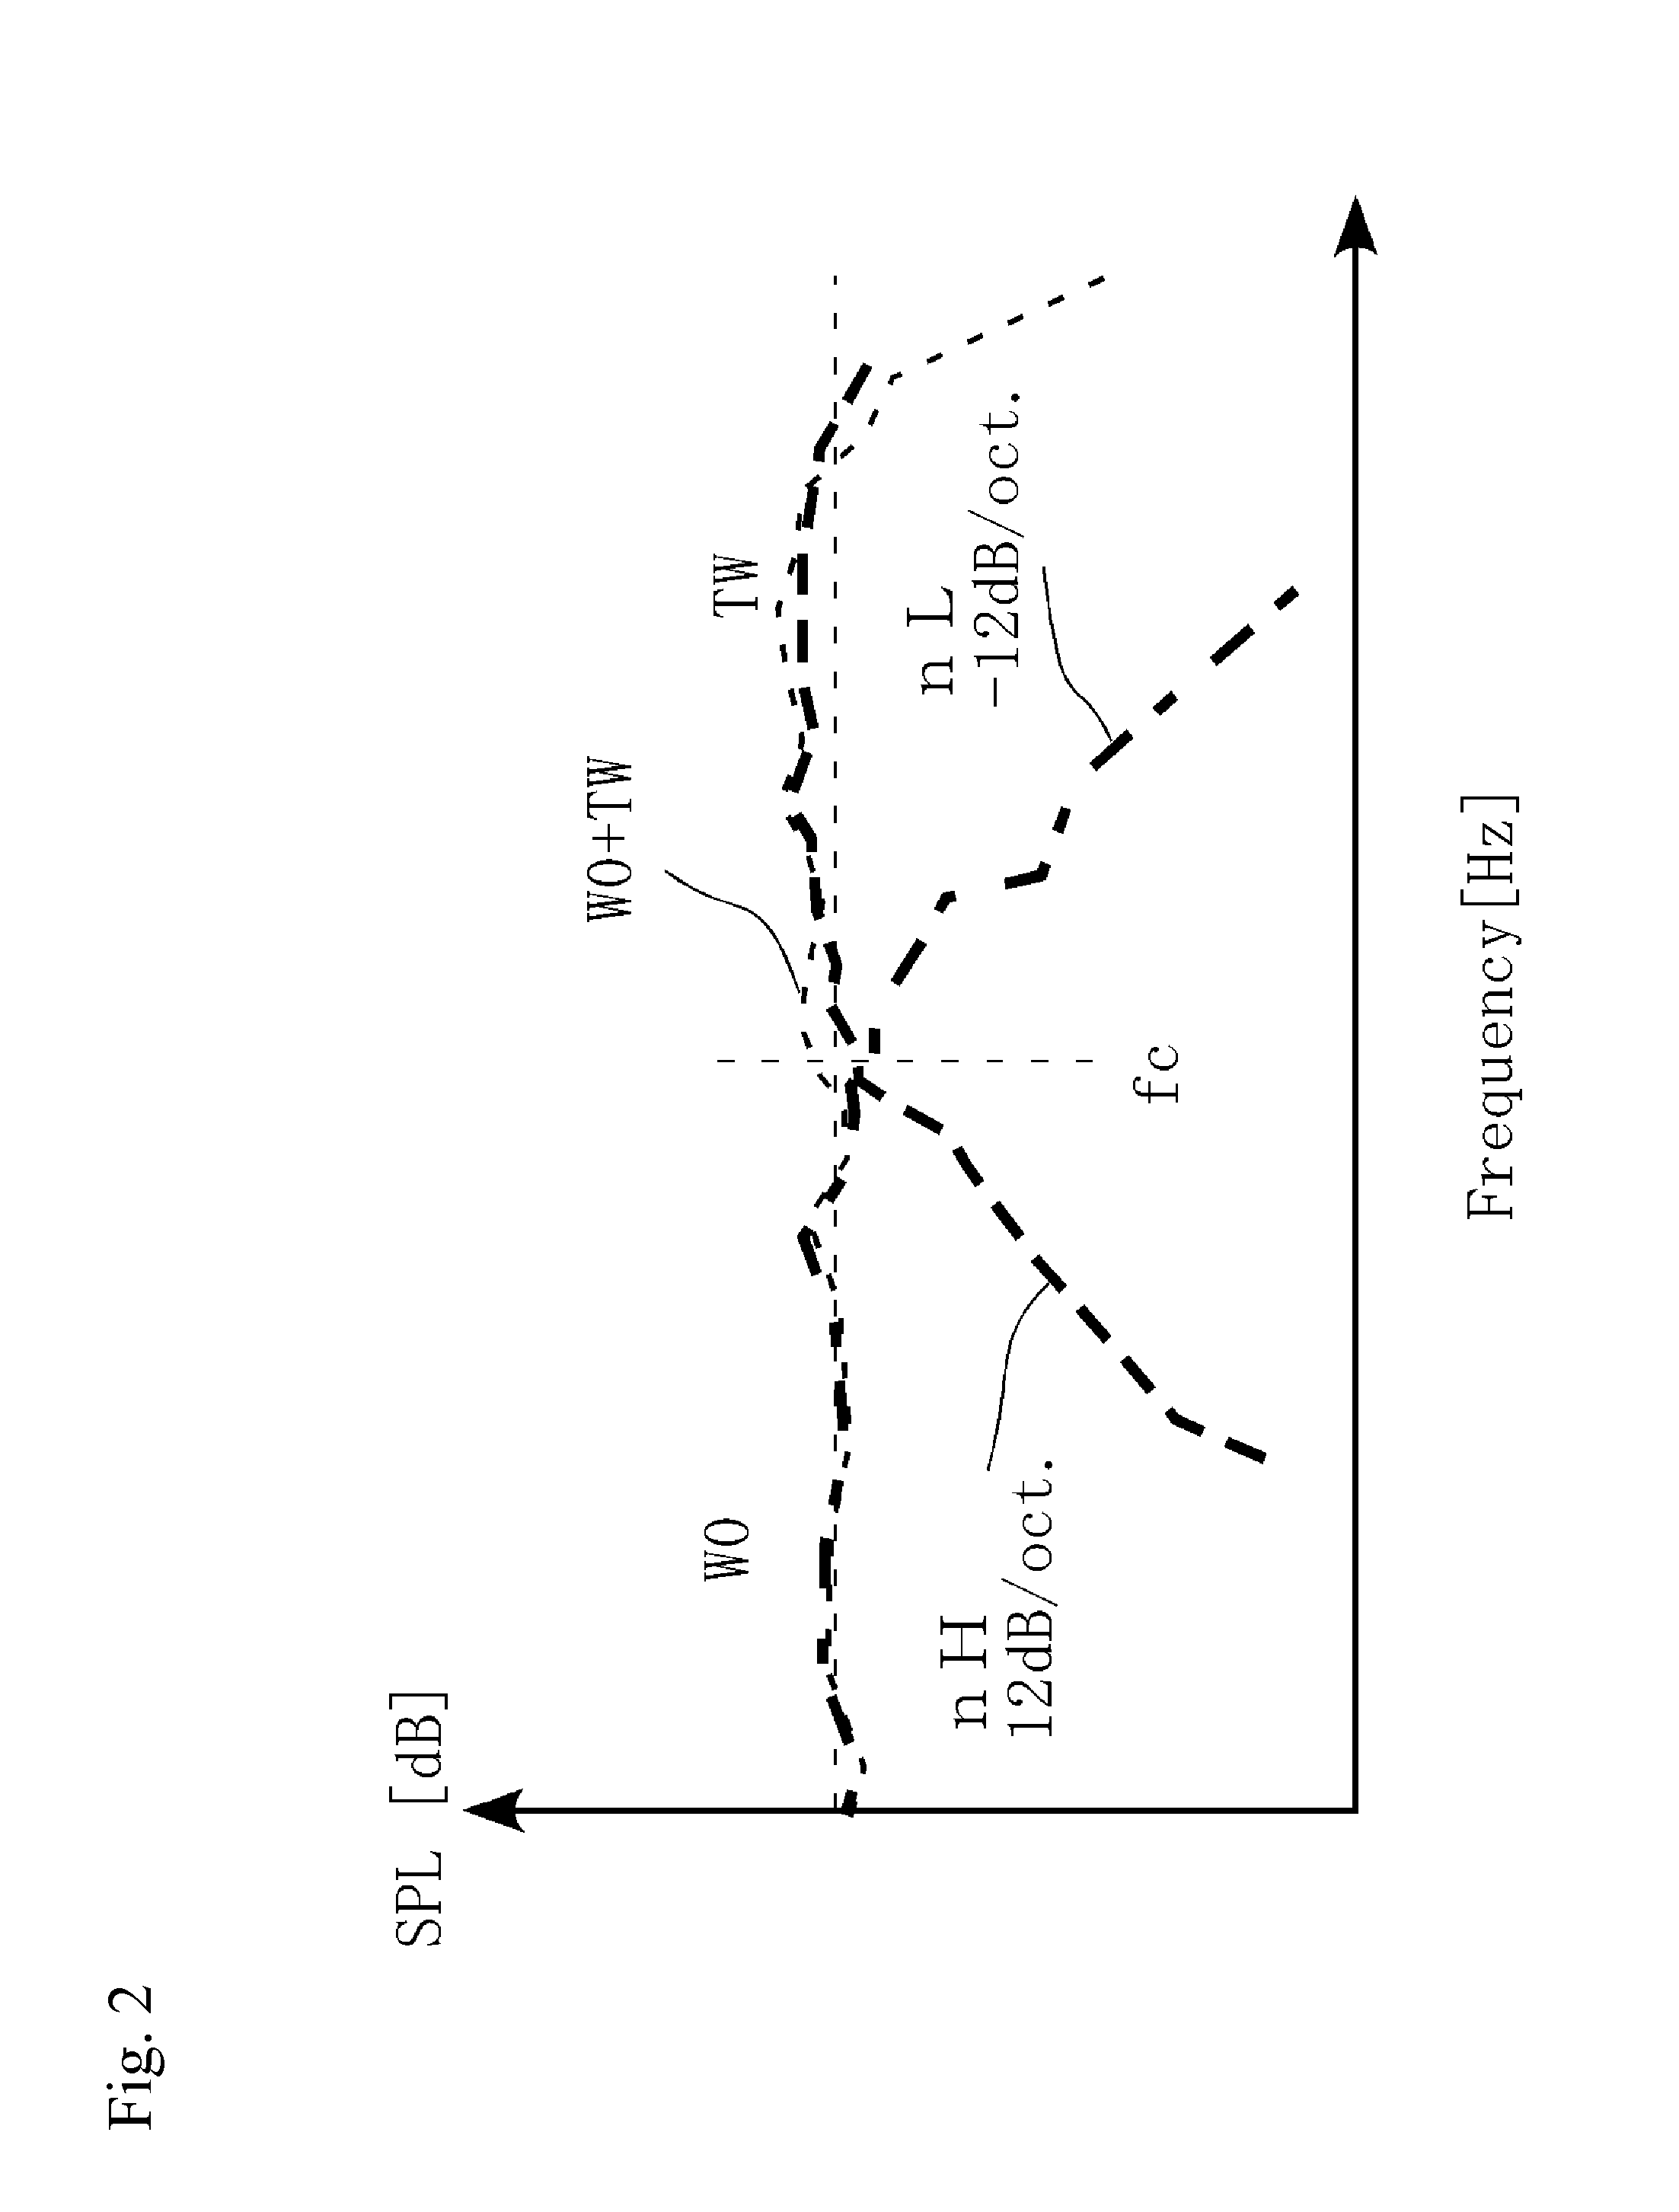 Channel divider, sound reproducing system including the channel divider, and method for setting crossover frequency of the channel divider